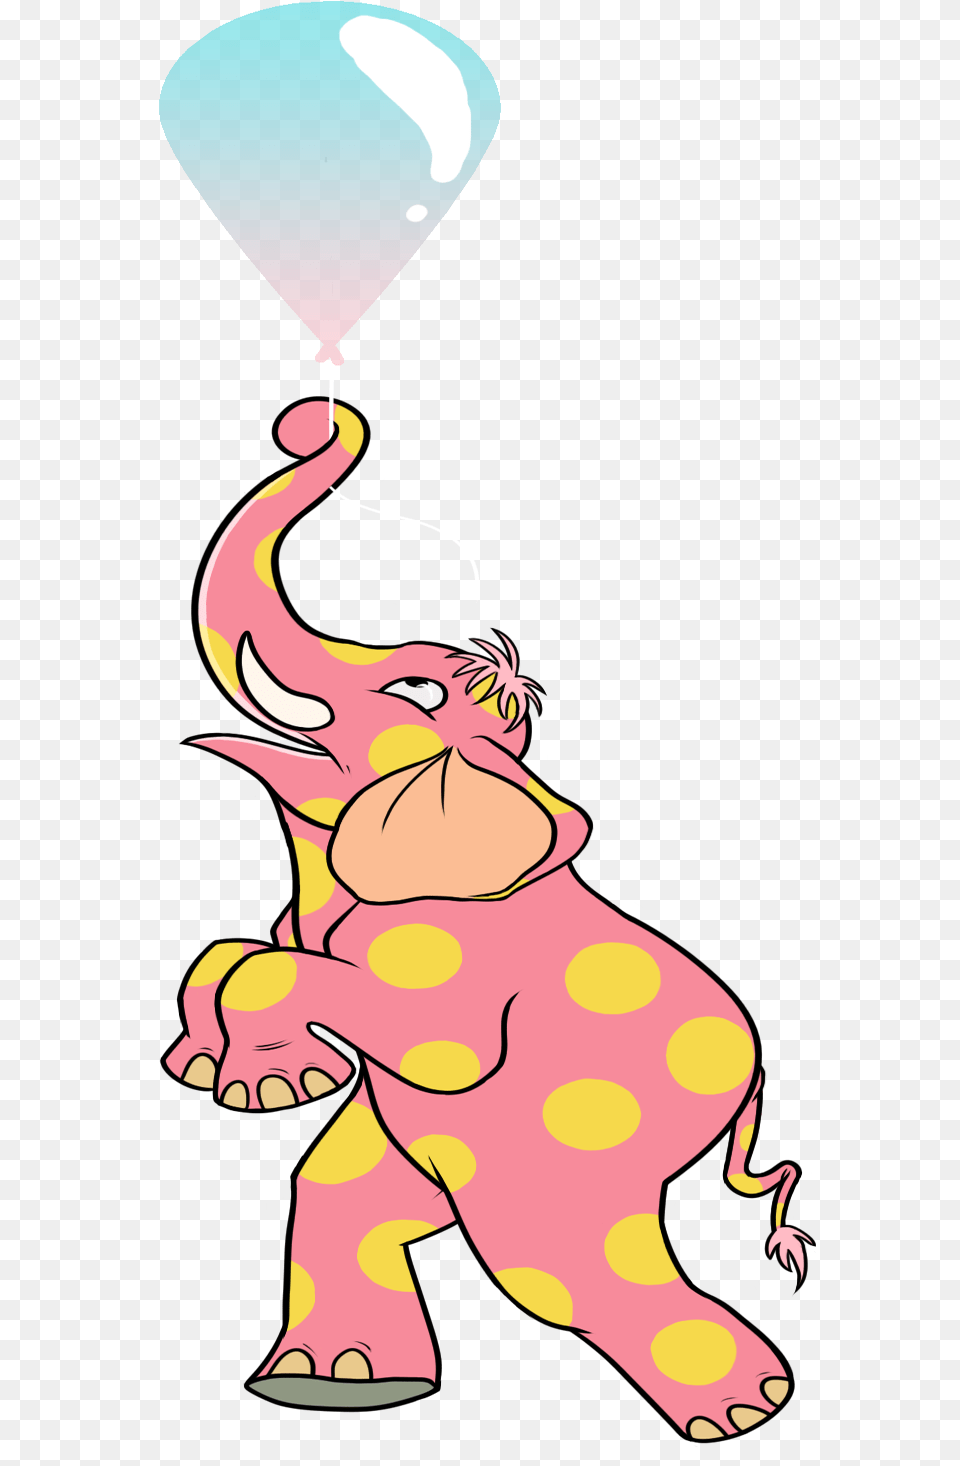 The Pink Elephant With Golden Spots Illustration, Baby, Person, Balloon, Cartoon Free Png